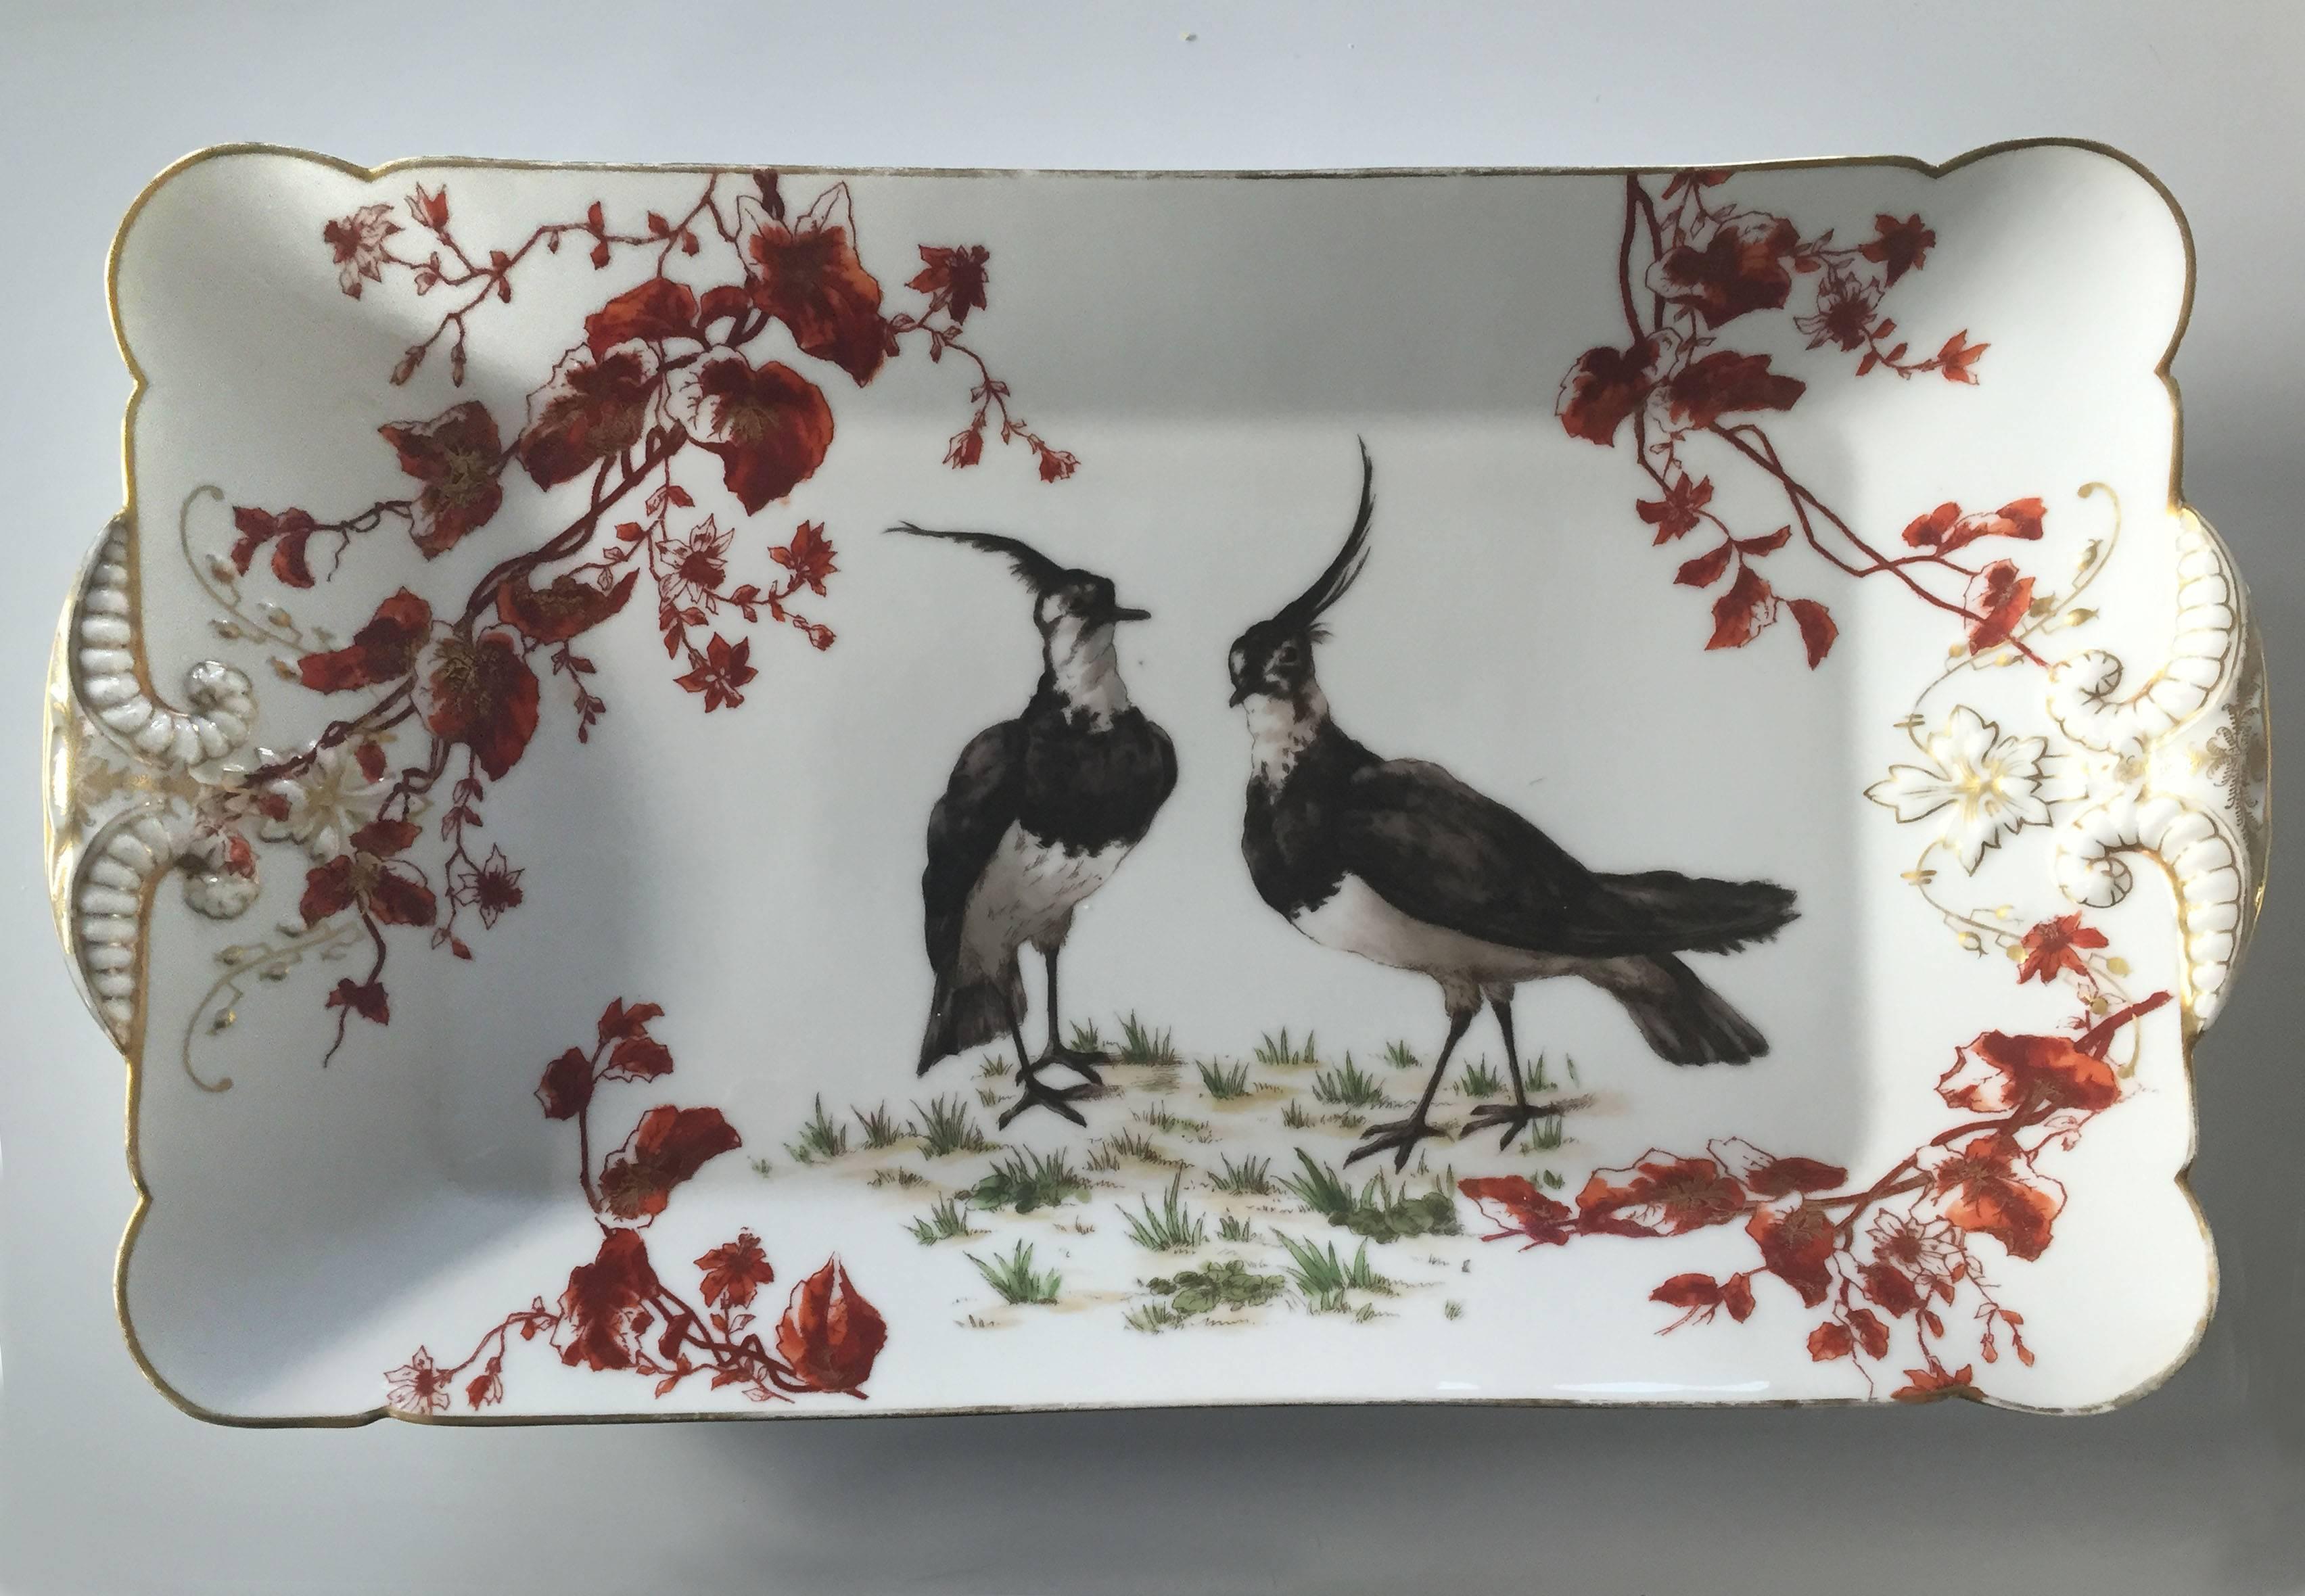 Gorgeous hand-painted platter by Charles Field Haviland, featuring two birds, surrounded by curling branches. The platter is marked by a manufacturer's stamp (CFH/GDM) on the bottom.